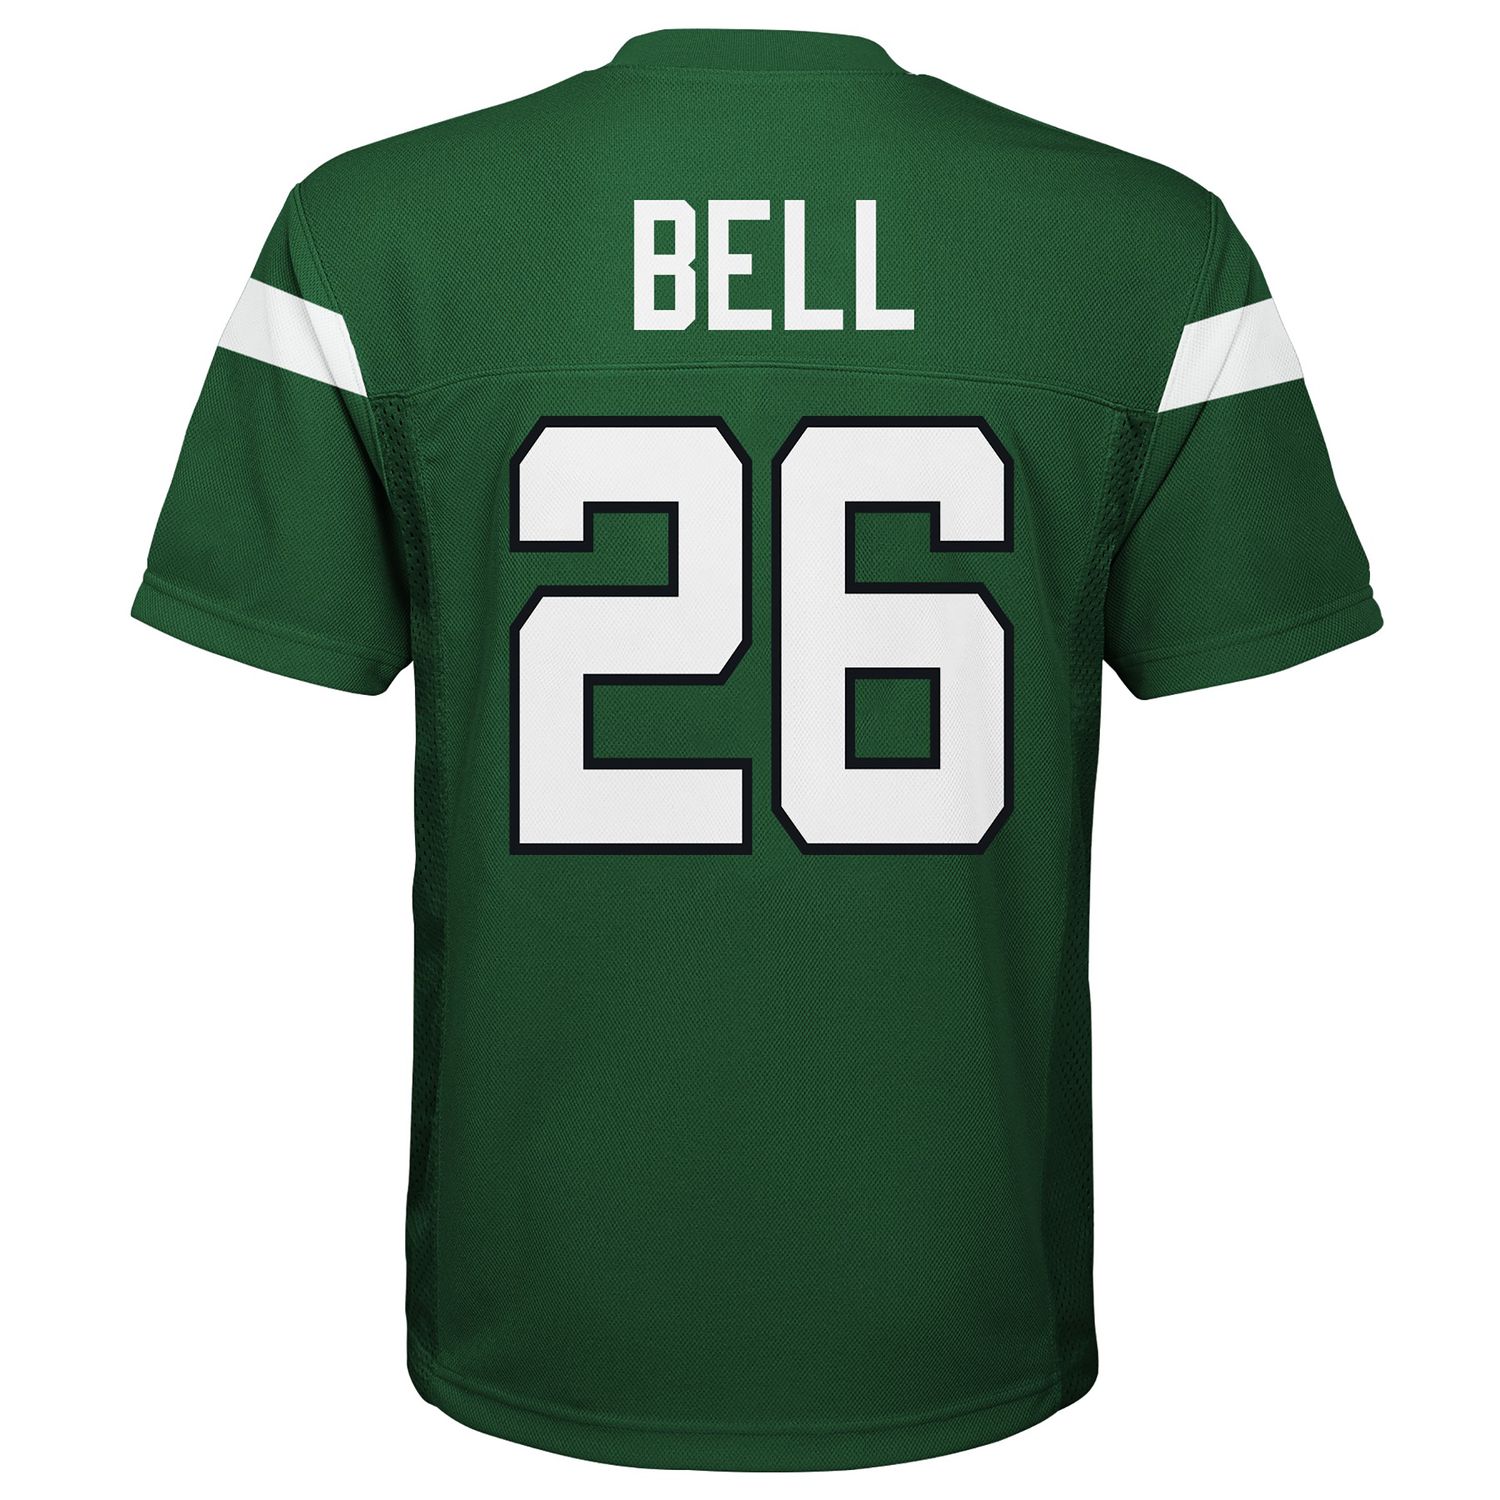 bell jets jersey